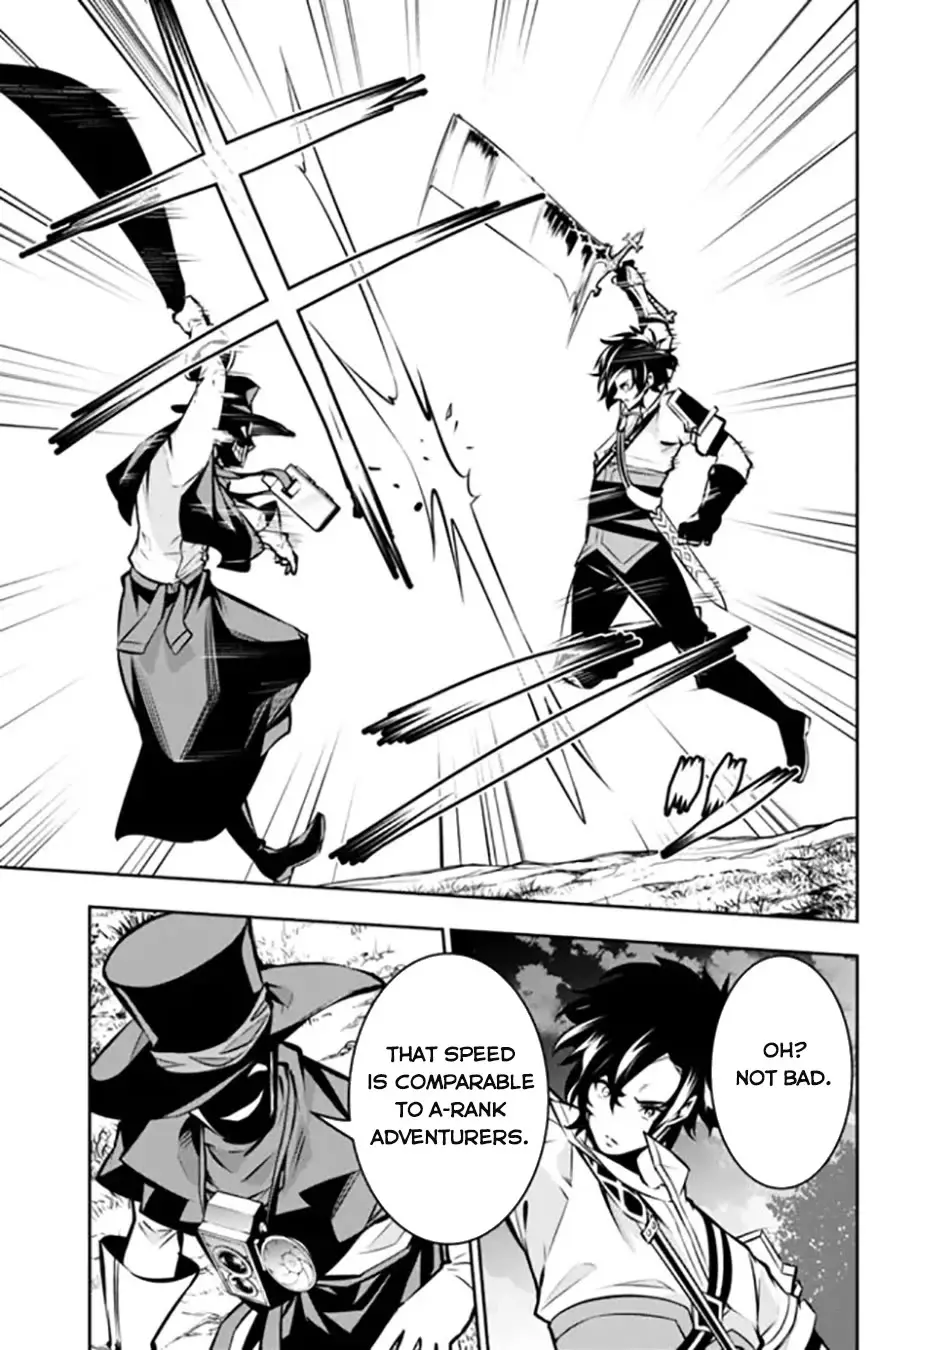 The Strongest Magical Swordsman Ever Reborn As An F-Rank Adventurer. - 106 page 12-70900867